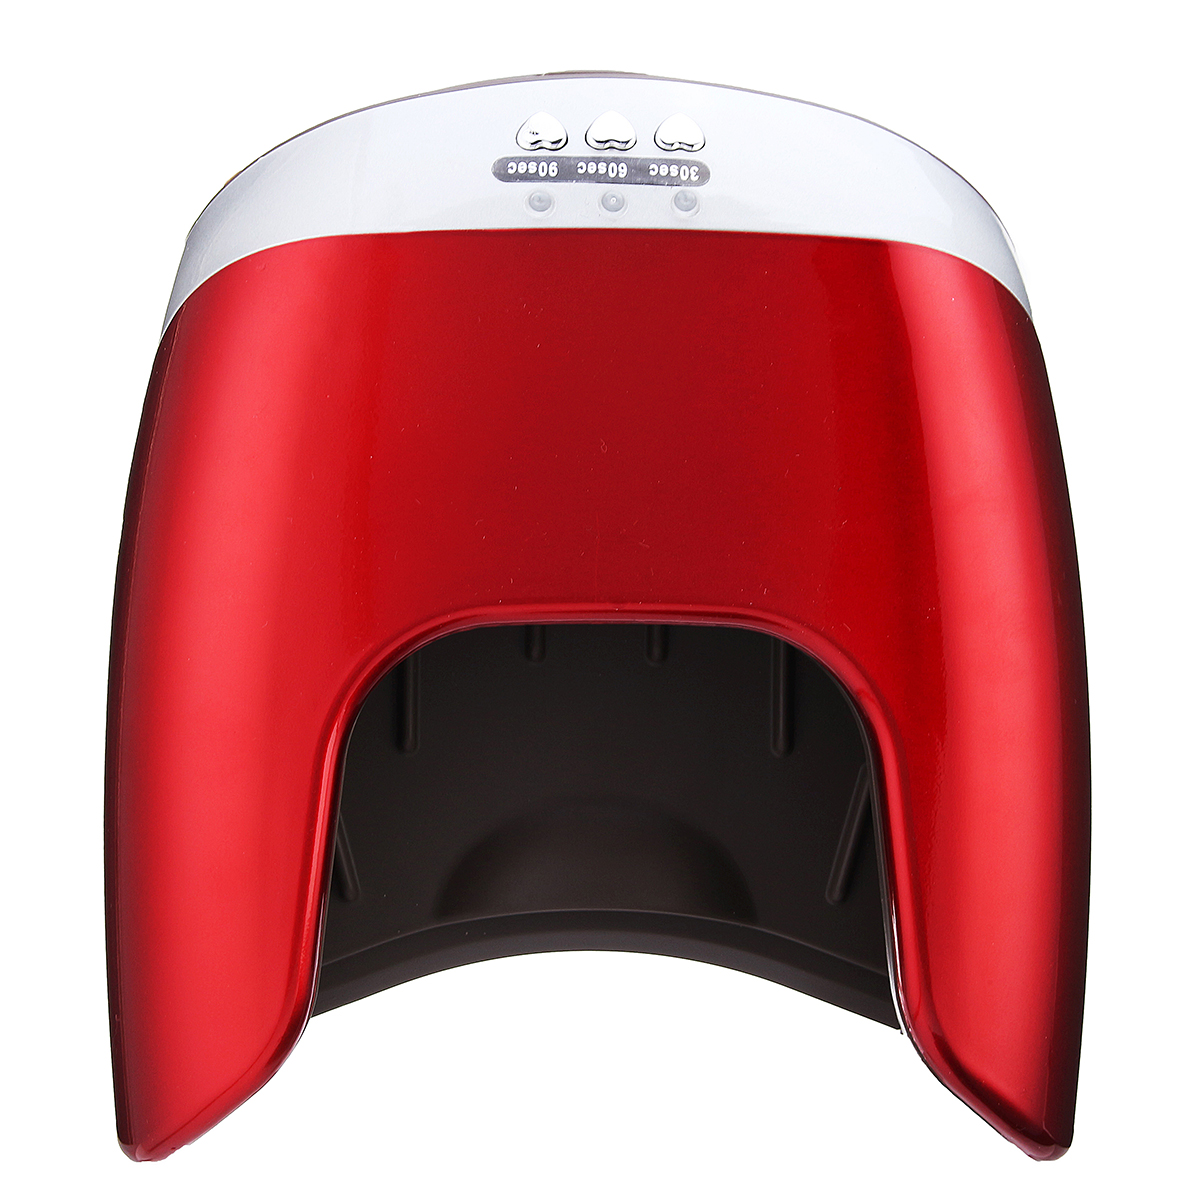 UV-Gel-Polish-LED-Nail-Lamp-Nail-Dryer-Curing-Light-with-Bottom-30s60s90s-Timer-LCD-Display-48W-1157031-2